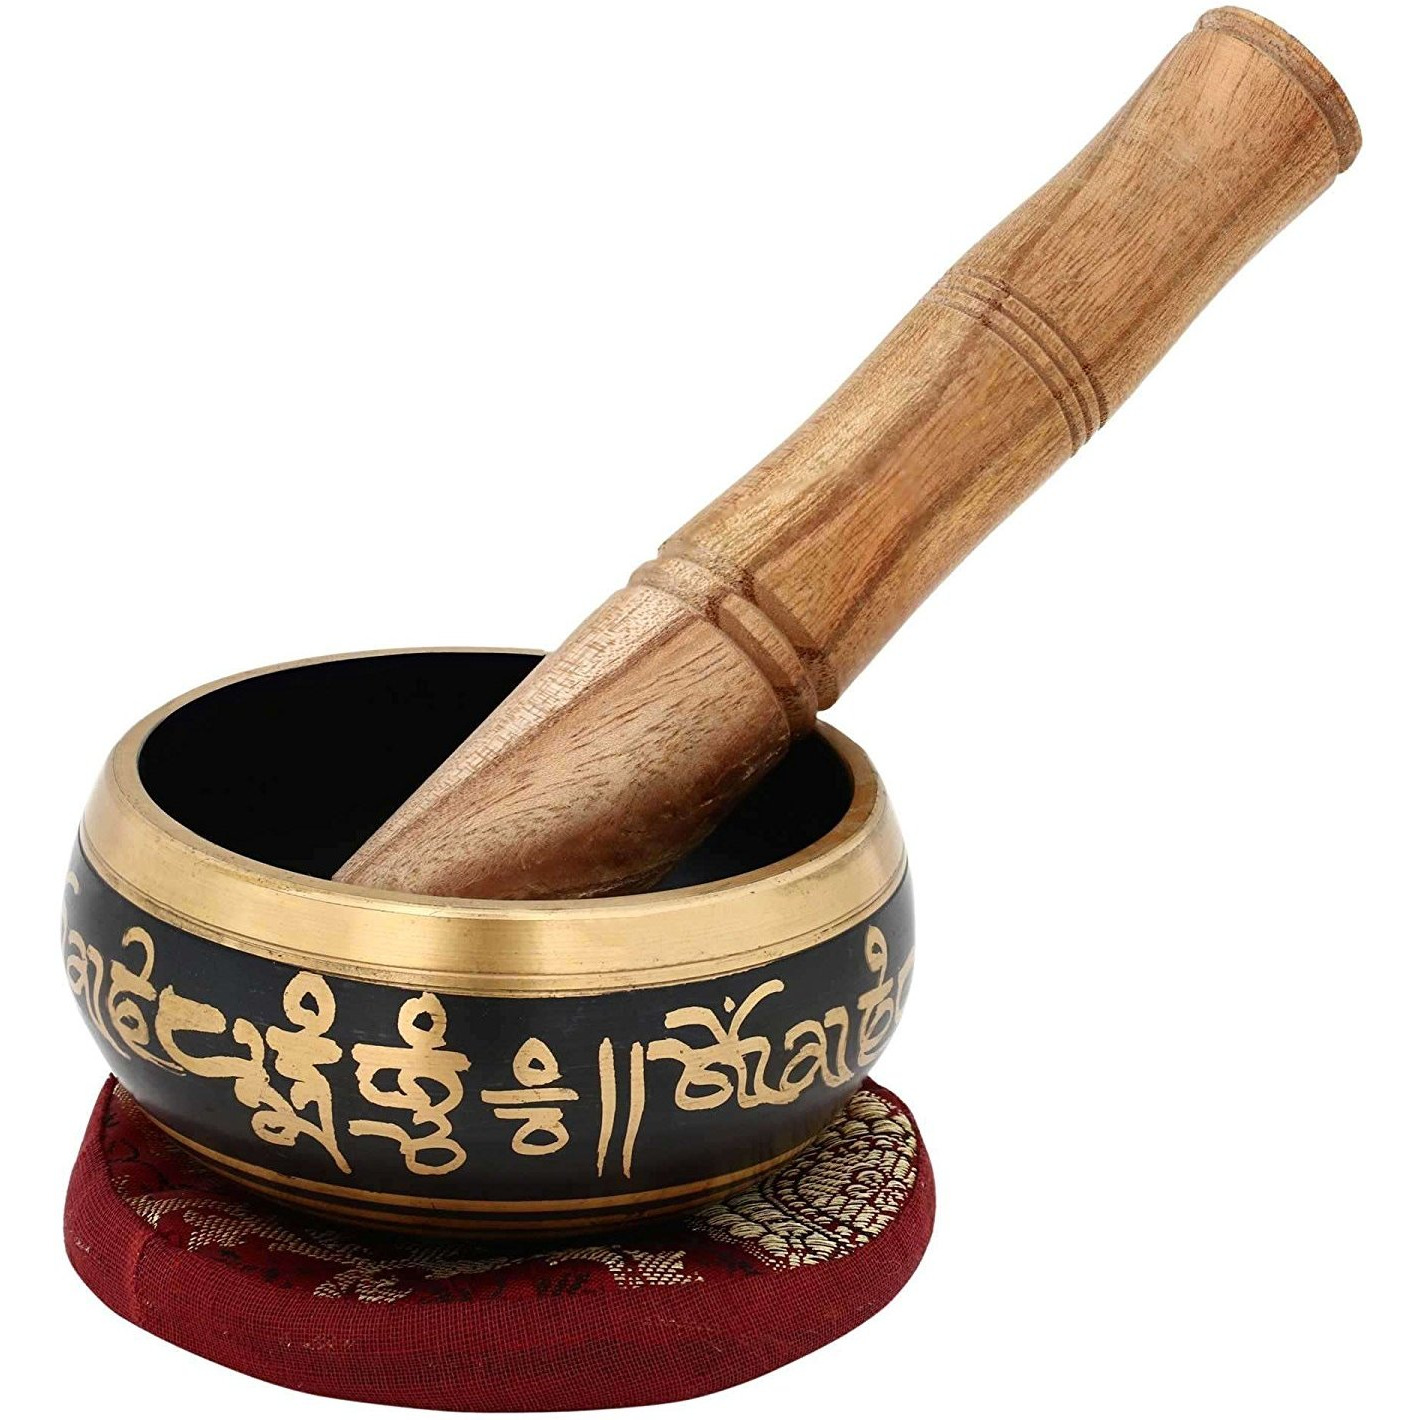 Winmaarc Singing Bowl Buddhist D??cor Religious Gift Metal Art India For Meditation 3.5 inches